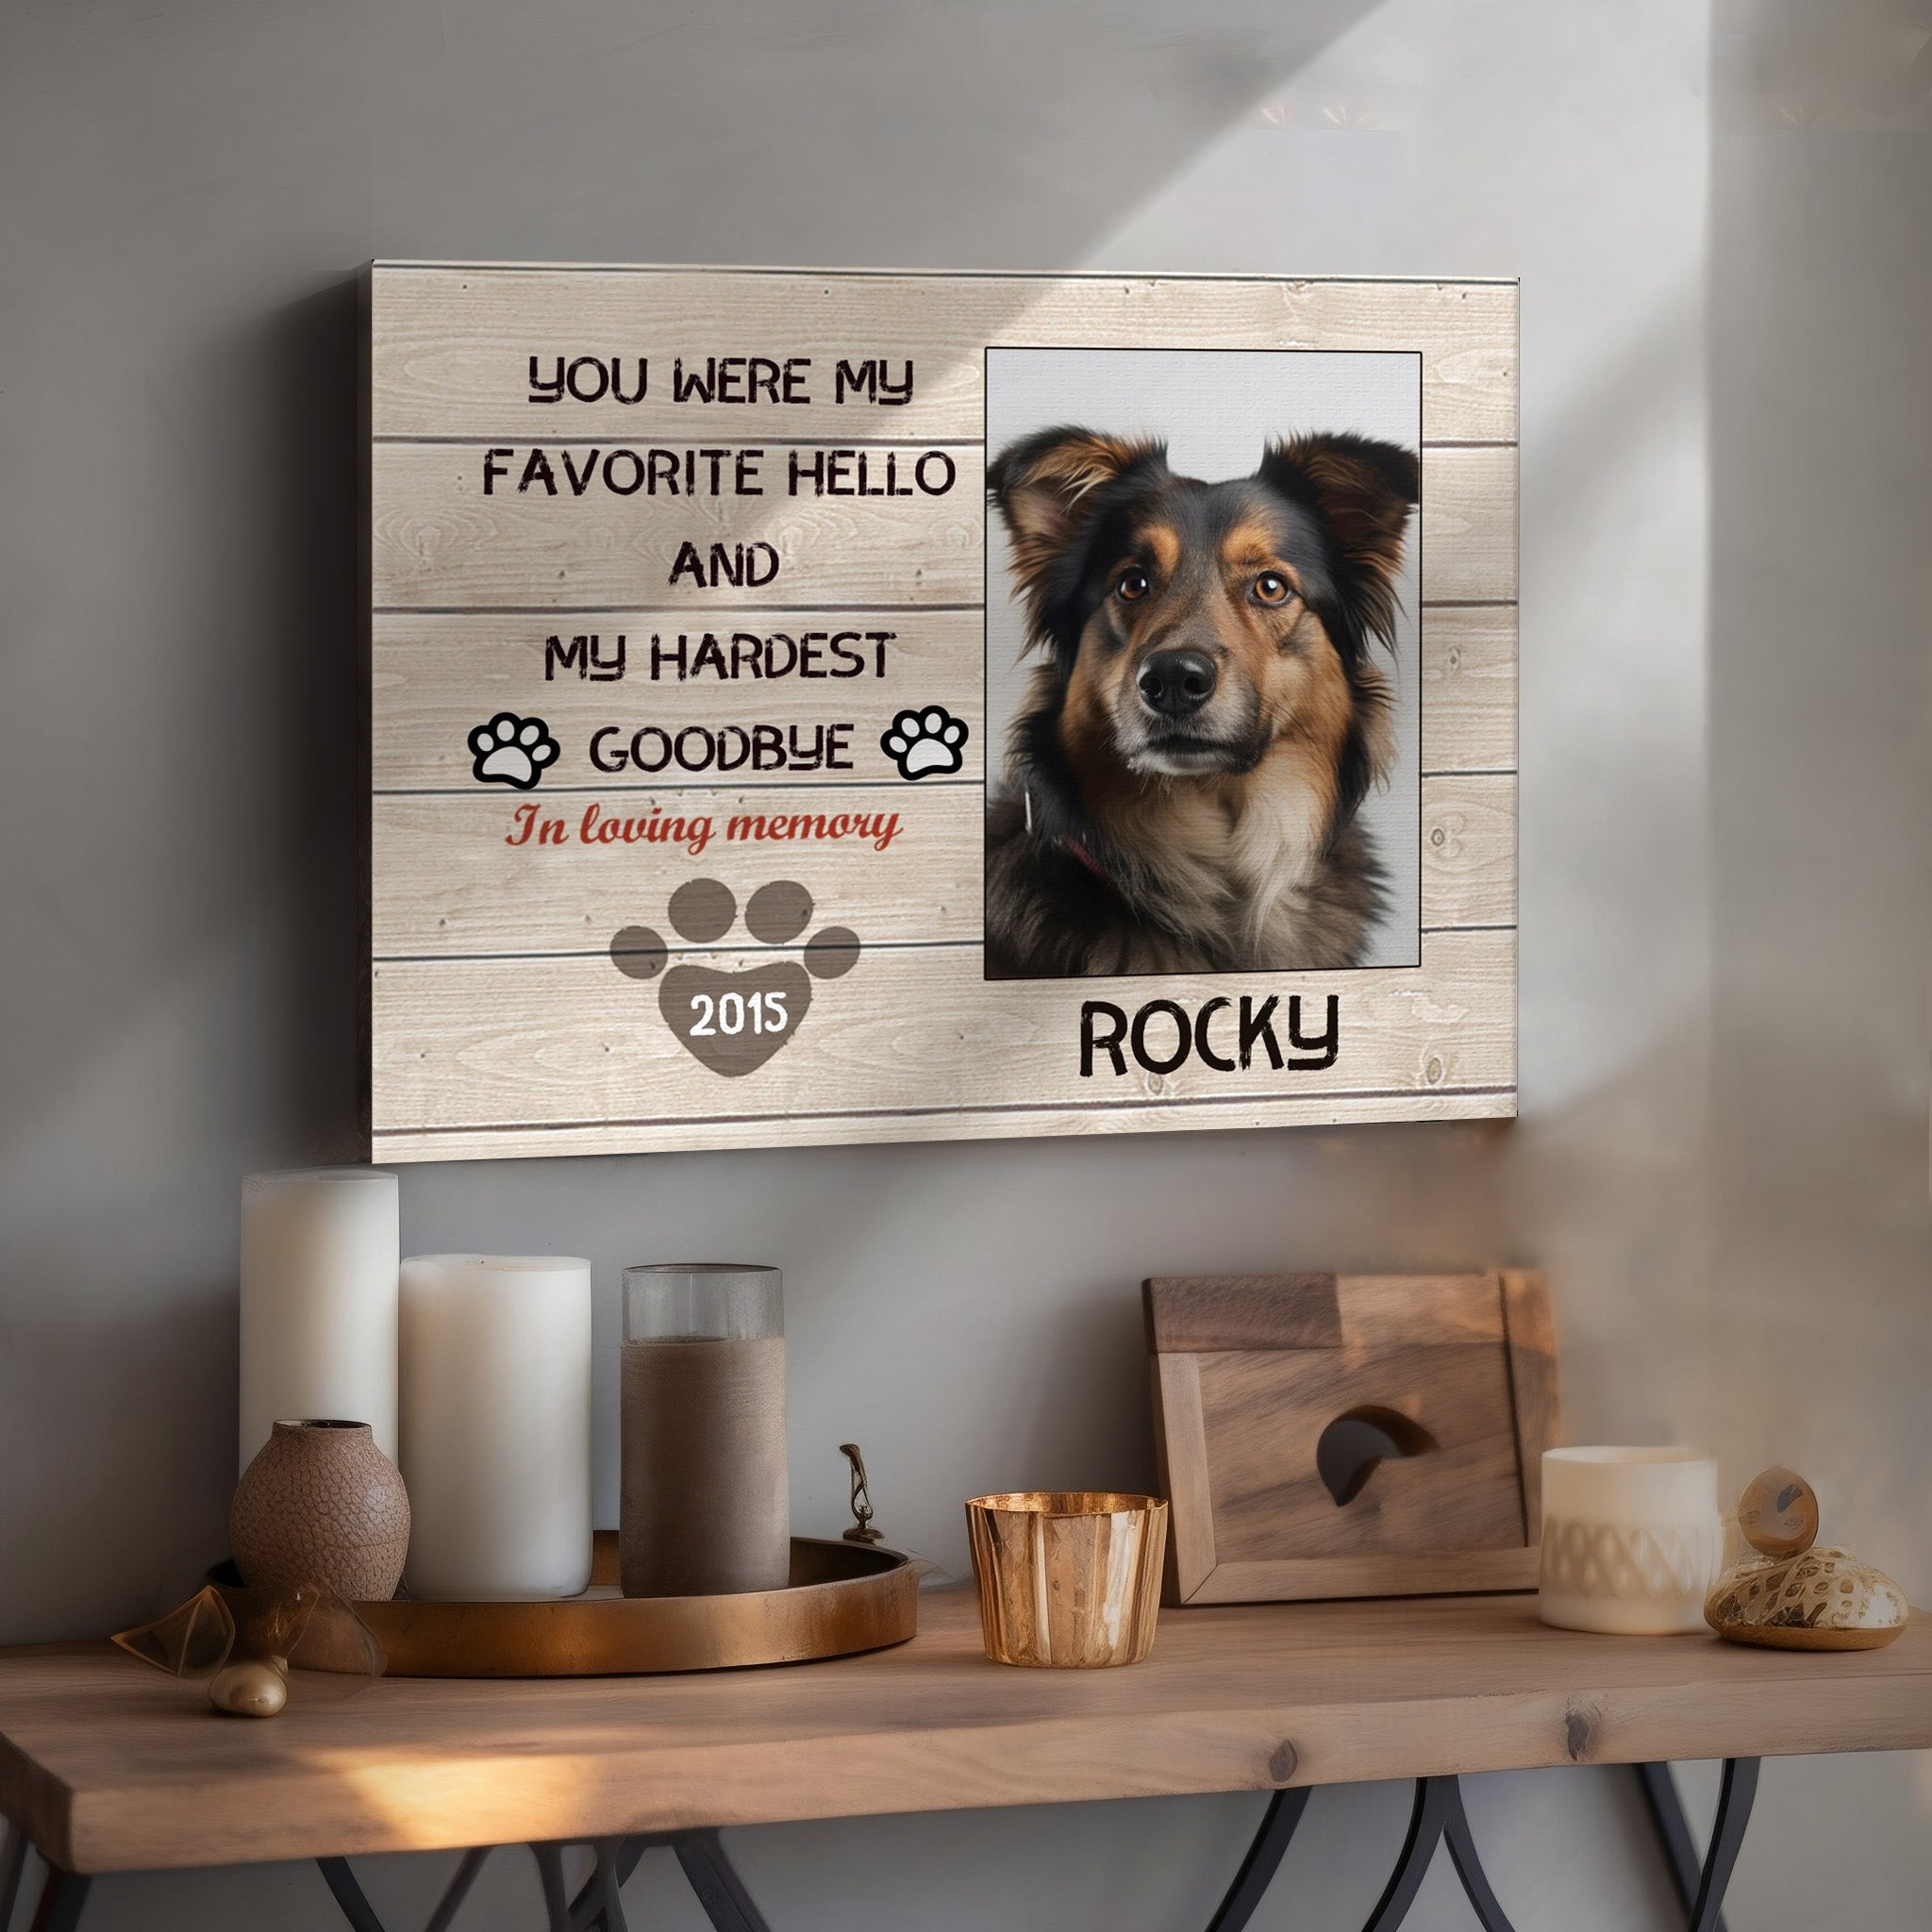 My Hardest Goodbye, Hang and Place - Personalized Canvas Print Pet Memorial